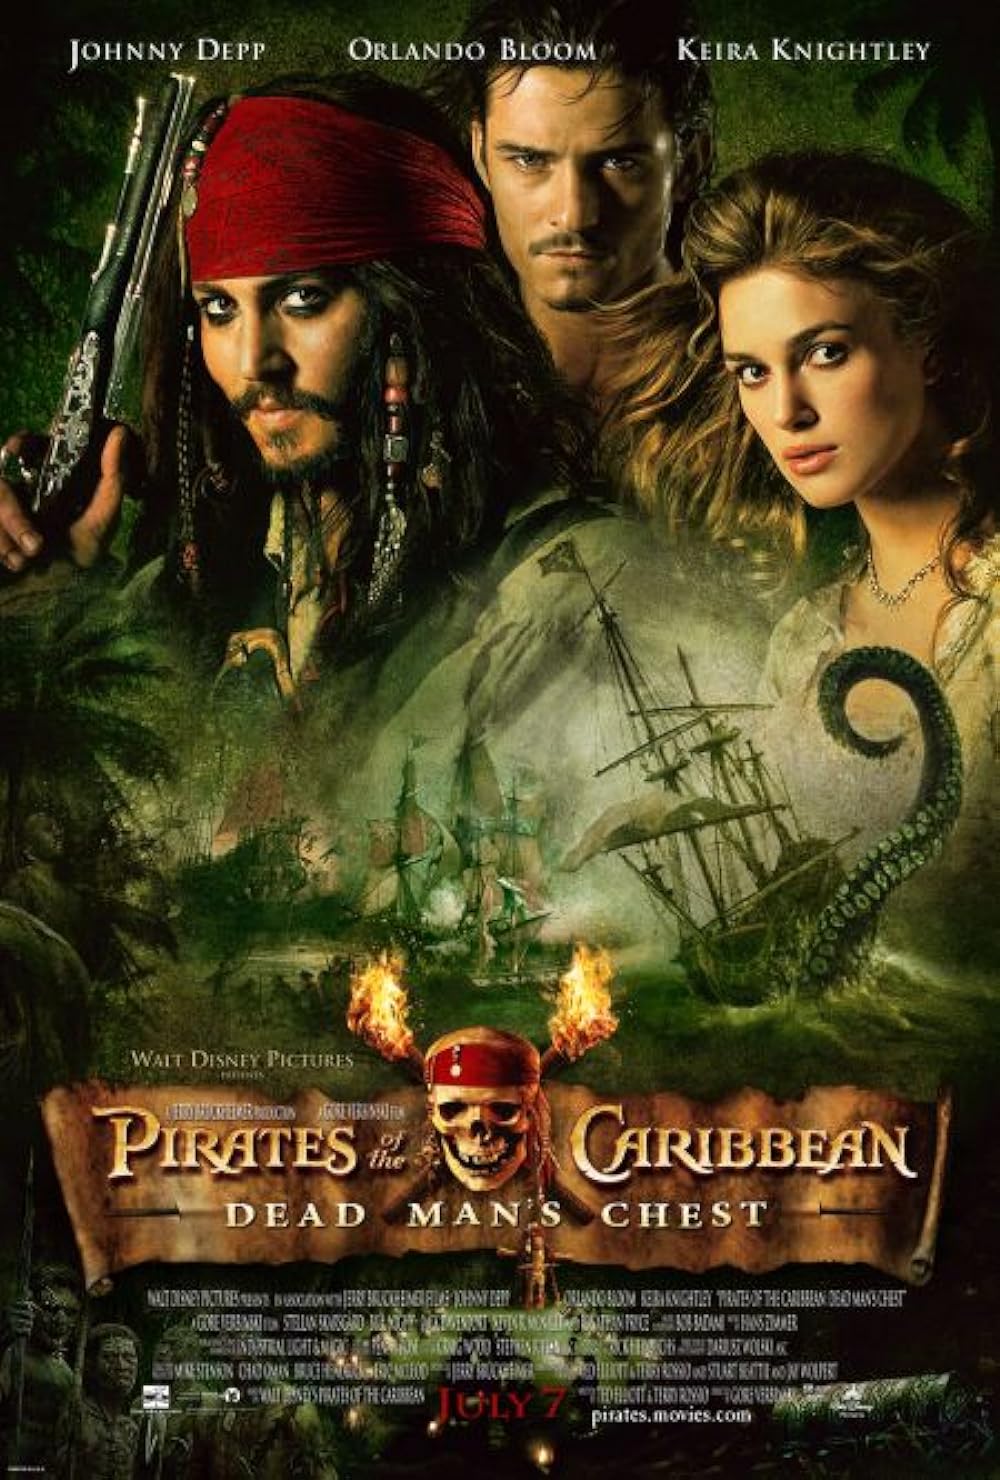 david linderholm recommends pirates full movie online pic